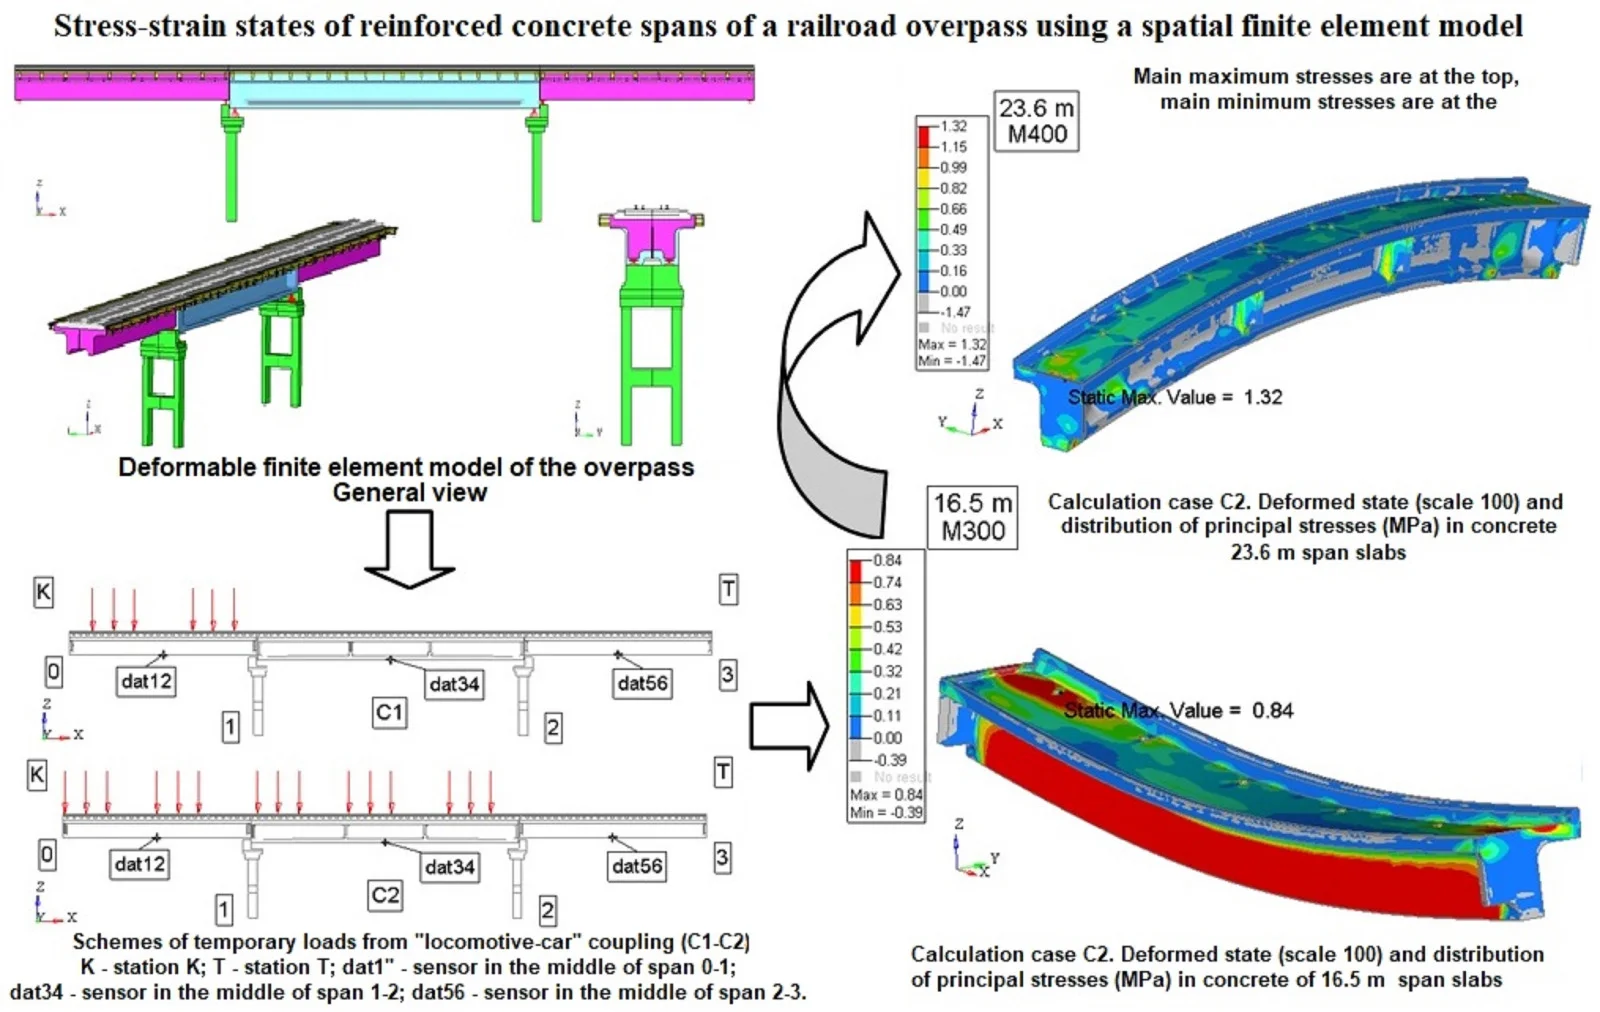 Stress-strain states of reinforced concrete spans of a railroad overpass using a spatial finite element model